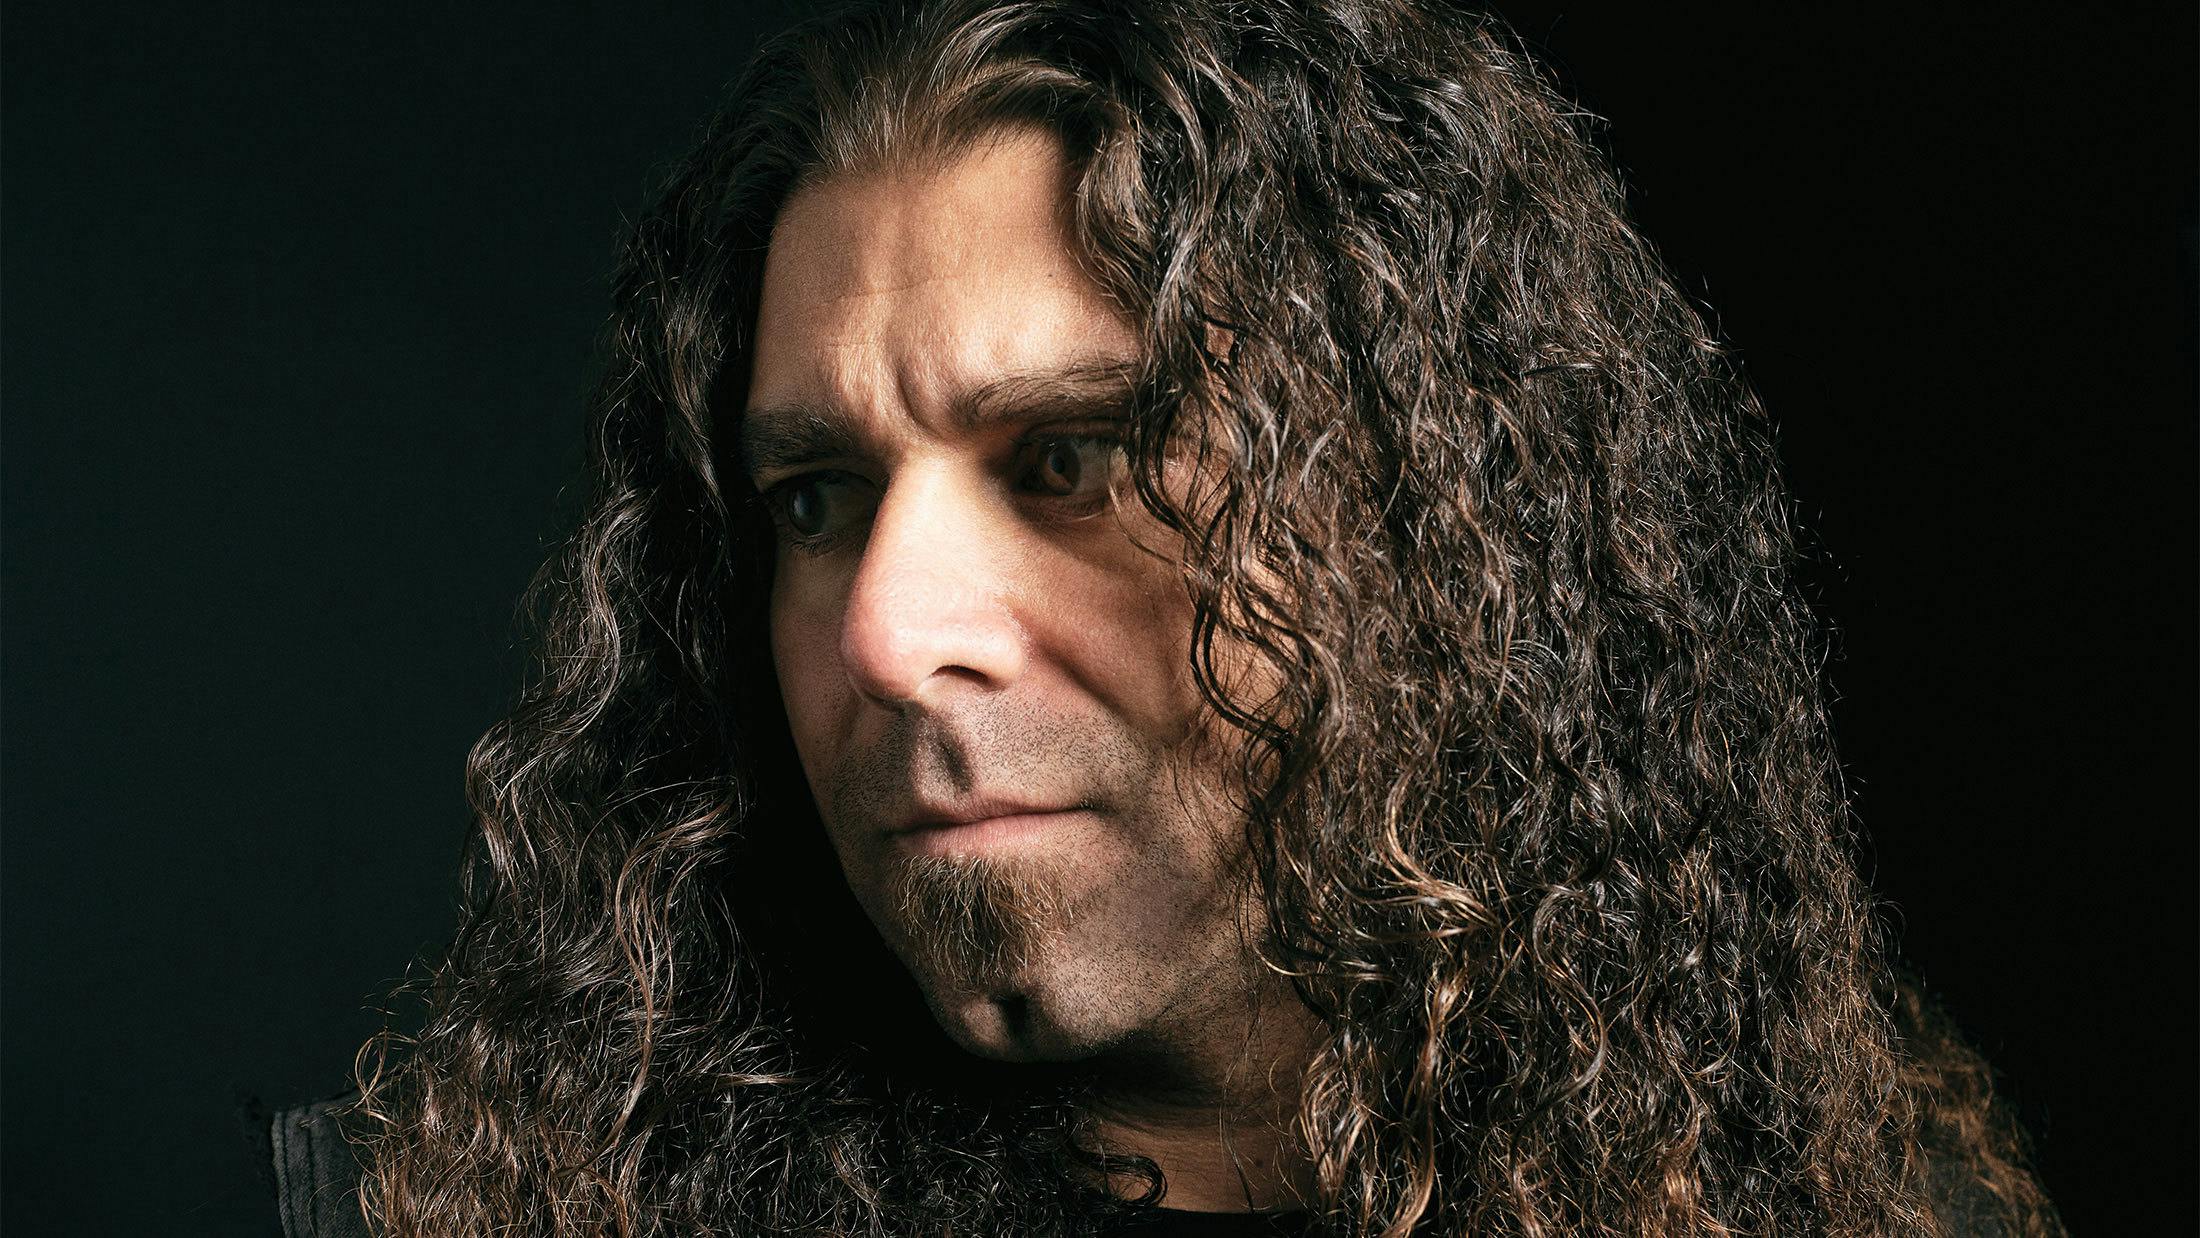 Claudio Sanchez: "Sometimes I Look At Us And Think Of King Kong... We're These Savages From The Jungle Put Out There As A Spectacle"